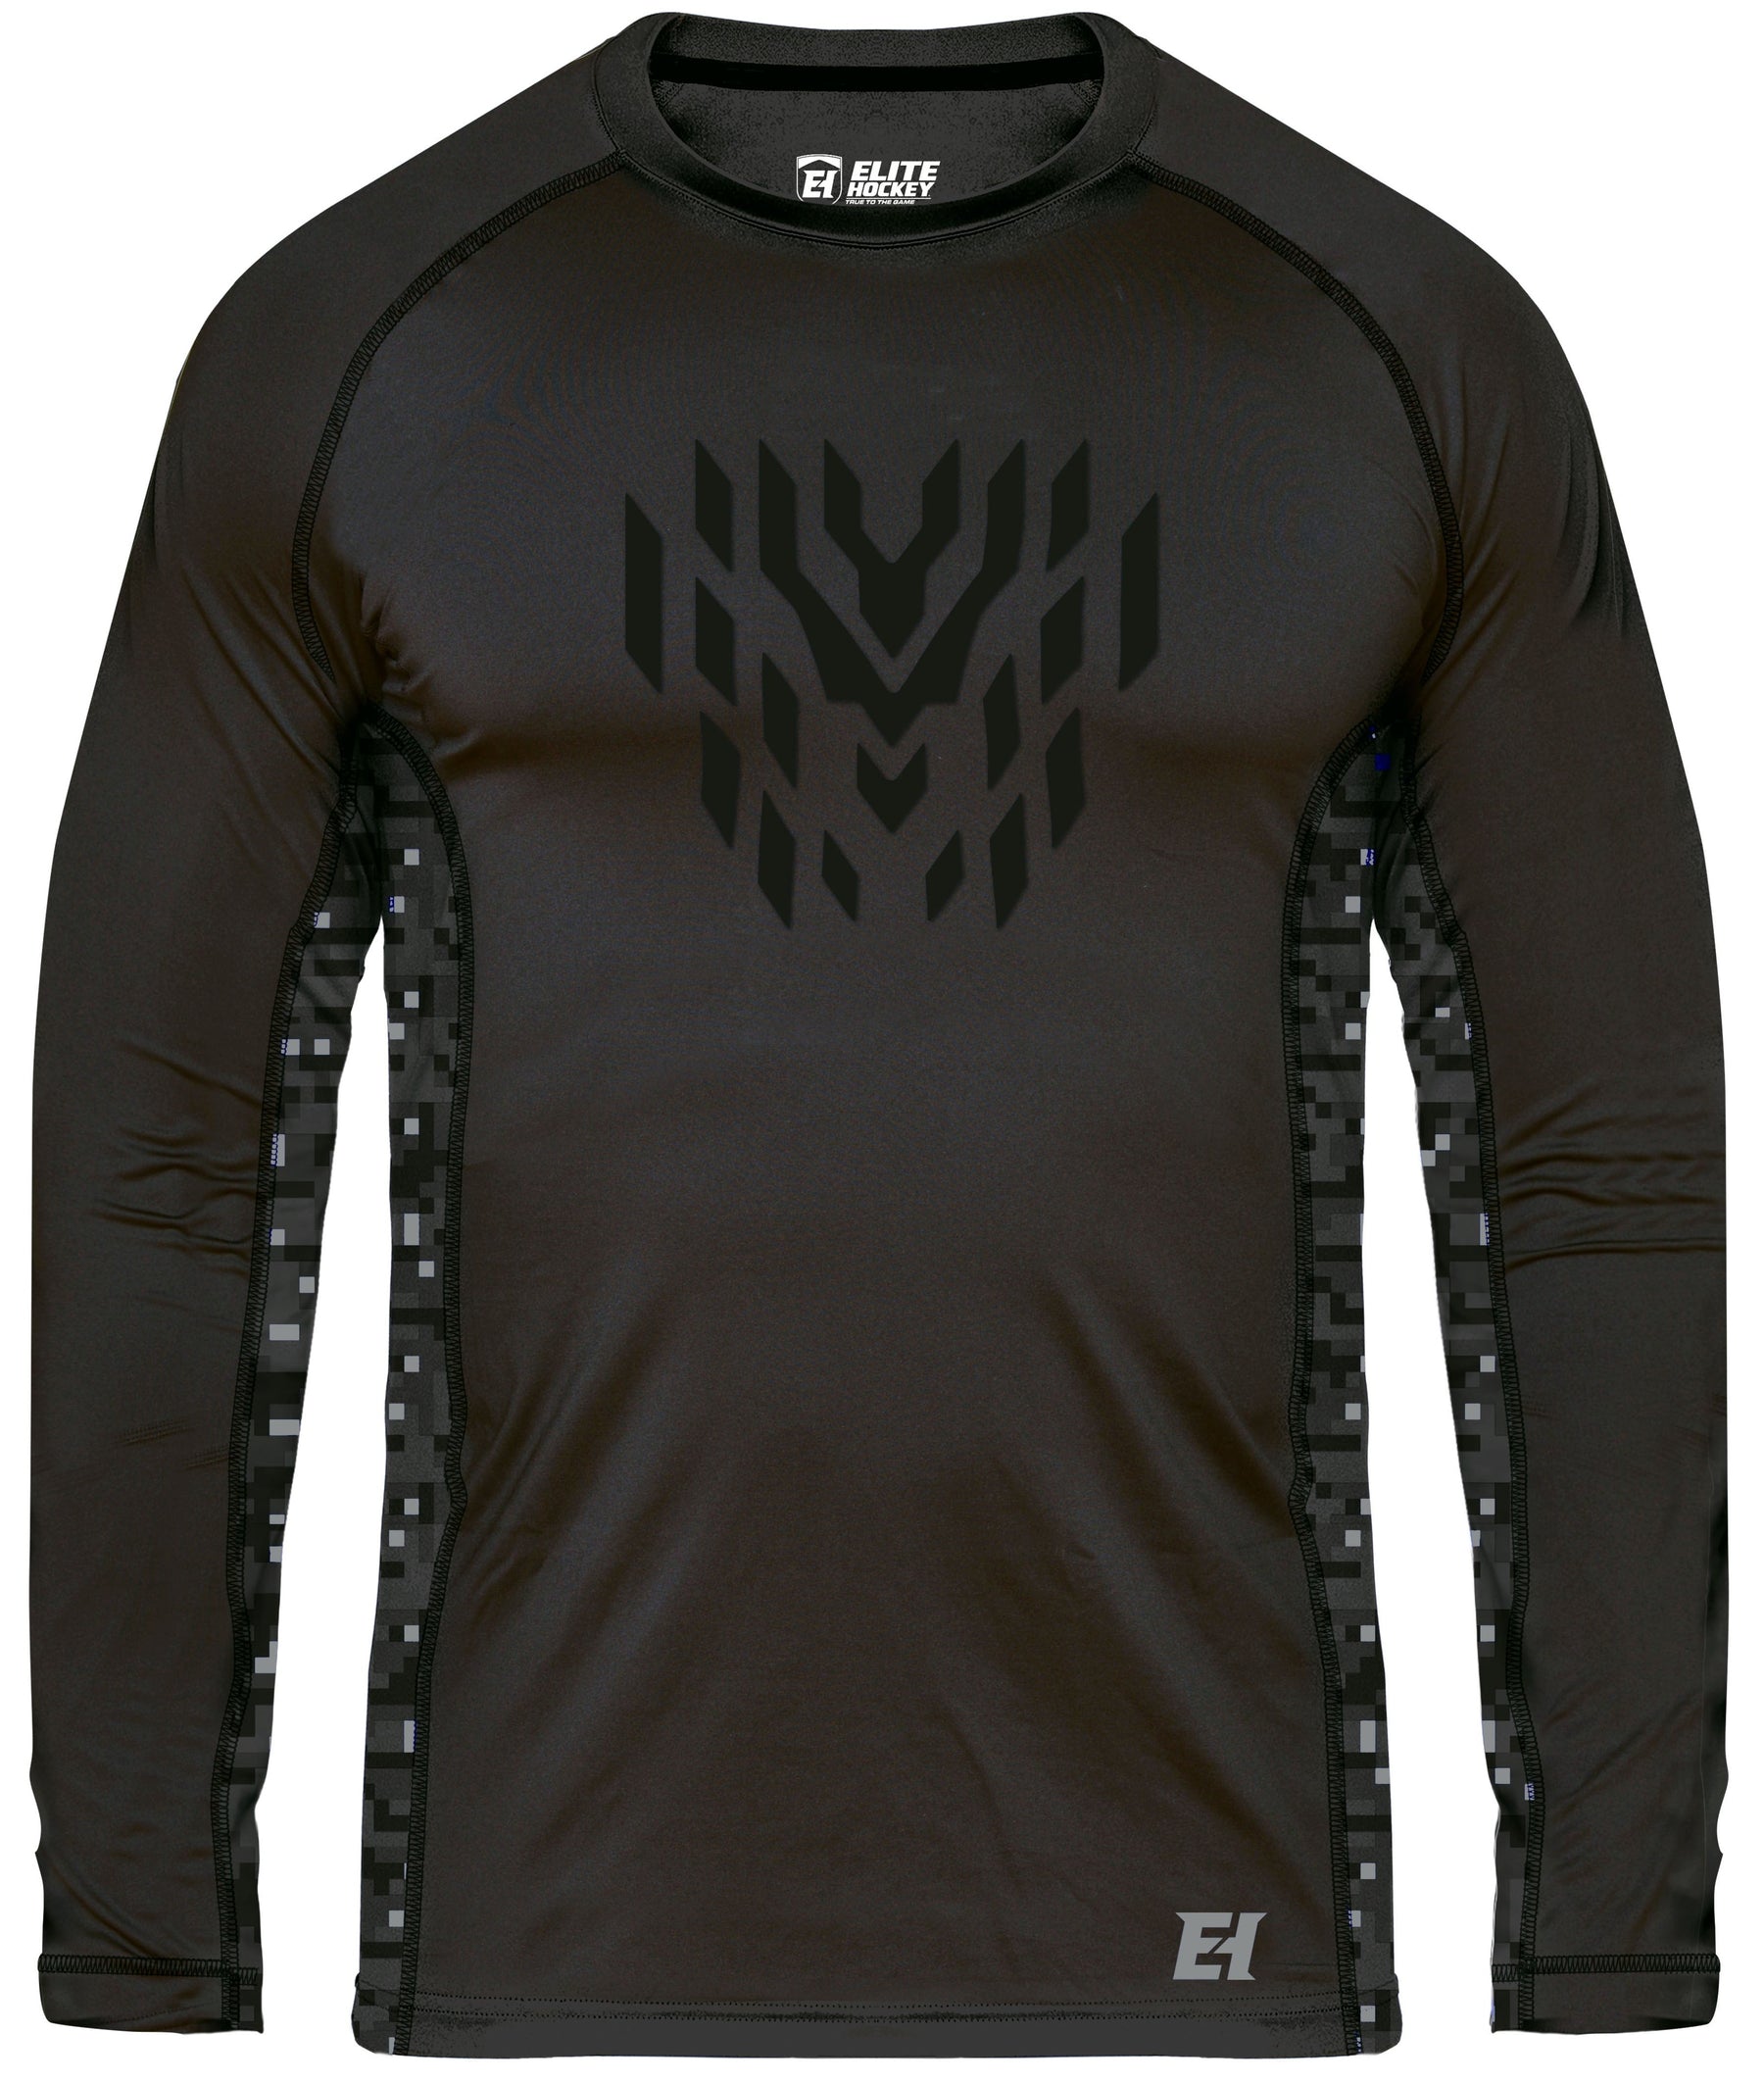 Elite Hockey Compression Long Sleeve Top for Boys